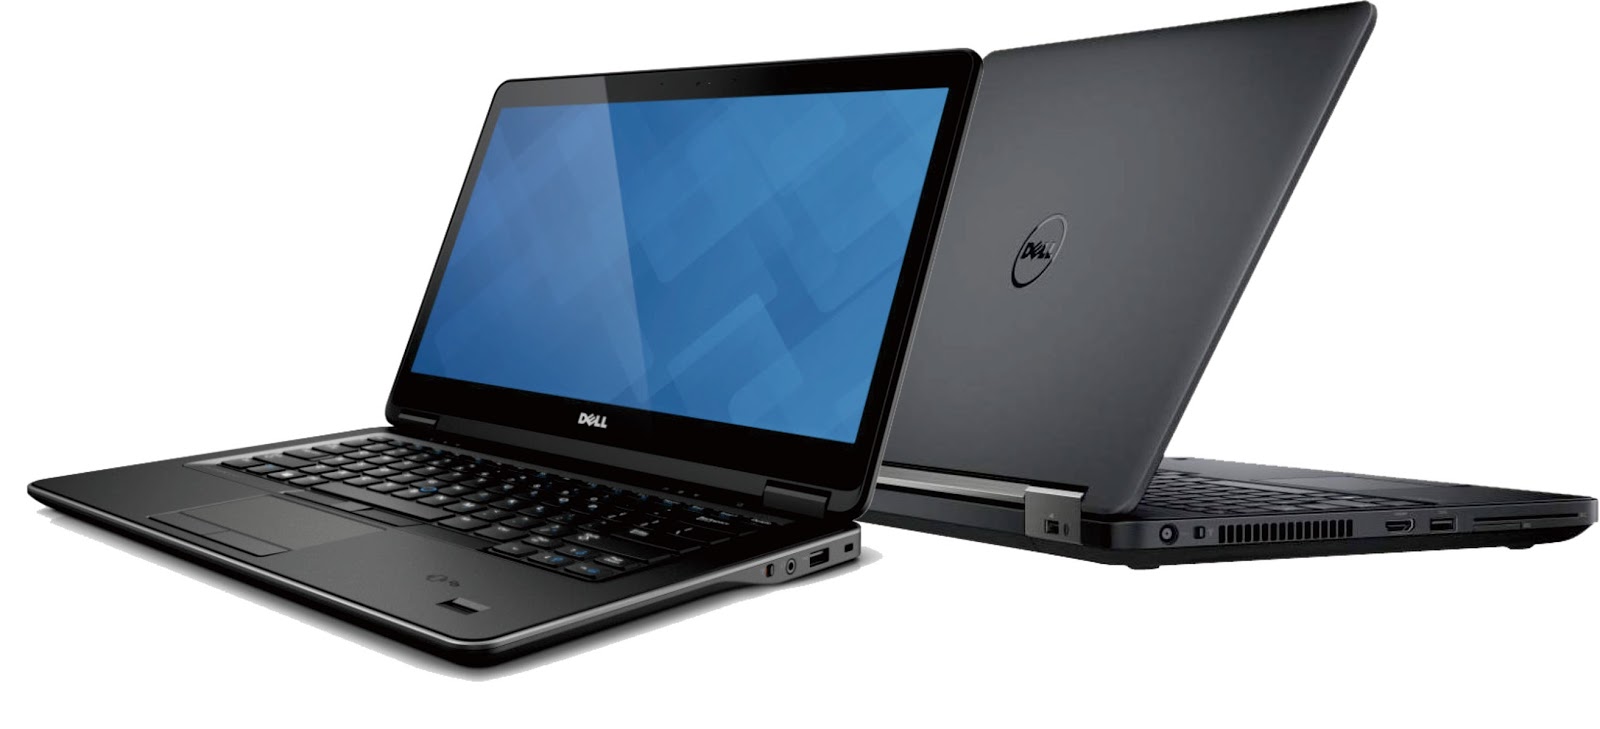 dell support software download